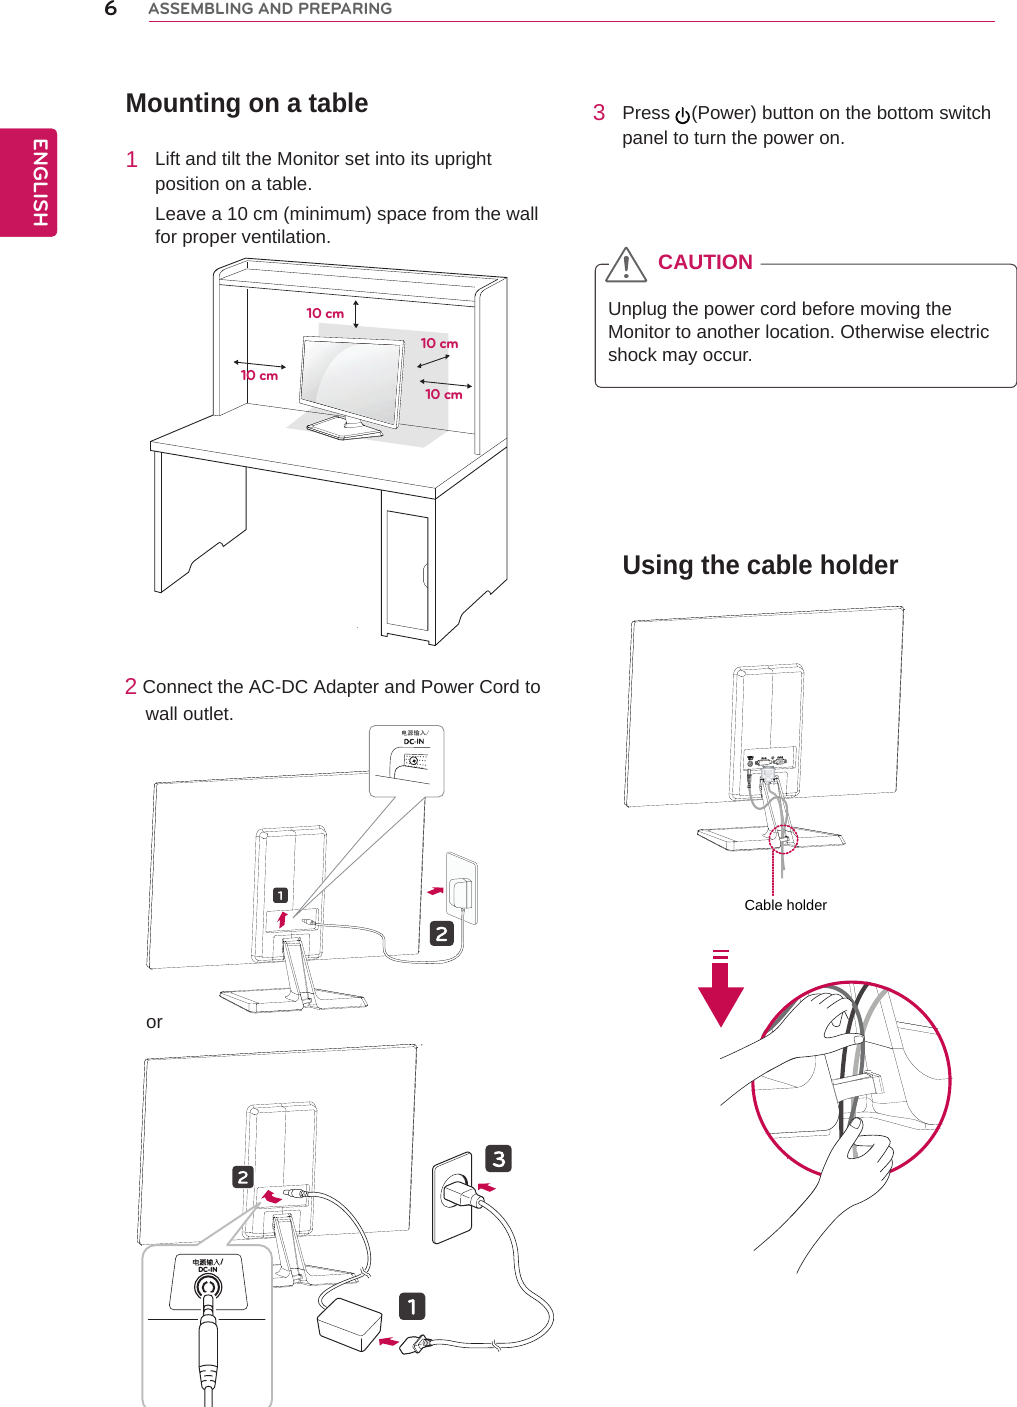 Mounting on a table1  Lift and tilt the Monitor set into its upright position on a table.Leave a 10 cm (minimum) space from the wall for proper ventilation.2 Connect the AC-DC Adapter and Power Cord to     wall outlet.3  Press  (Power) button on the bottom switch panel to turn the power on.Unplug the power cord before moving the Monitor to another location. Otherwise electric shock may occur.CAUTION10 cm10 cm10 cm10 cmUsing the cable holder6ENGENGLISHASSEMBLING AND PREPARING电源输入/DC-IN /orCable holder